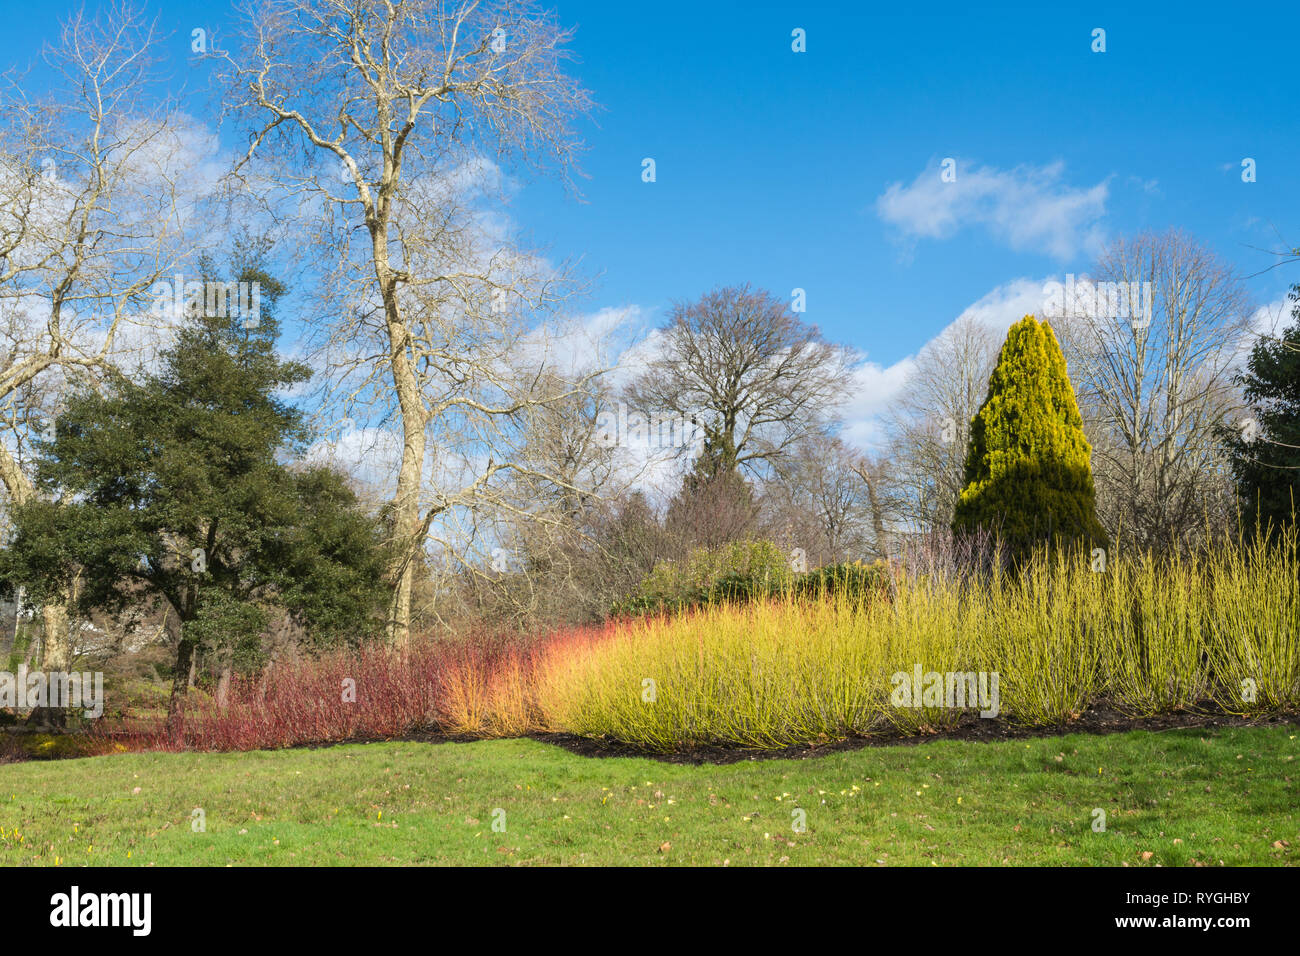 Savill garden in March with colourful stems of salix alba or dogwoods, Surrey/Berkshire border, UK Stock Photo